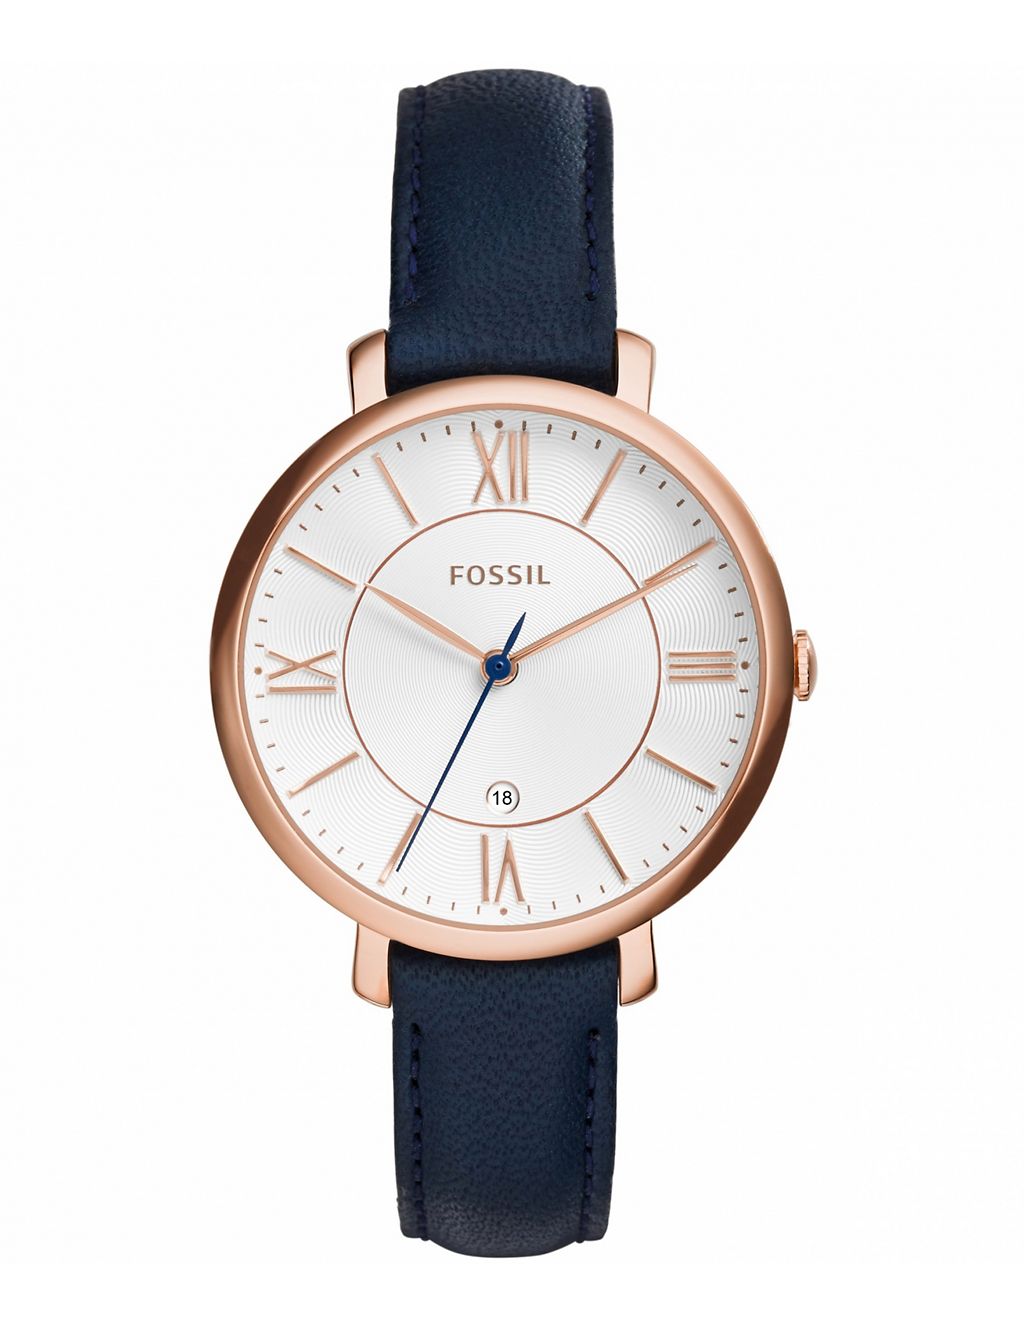 Fossil Jacqueline Navy Leather Watch 3 of 4